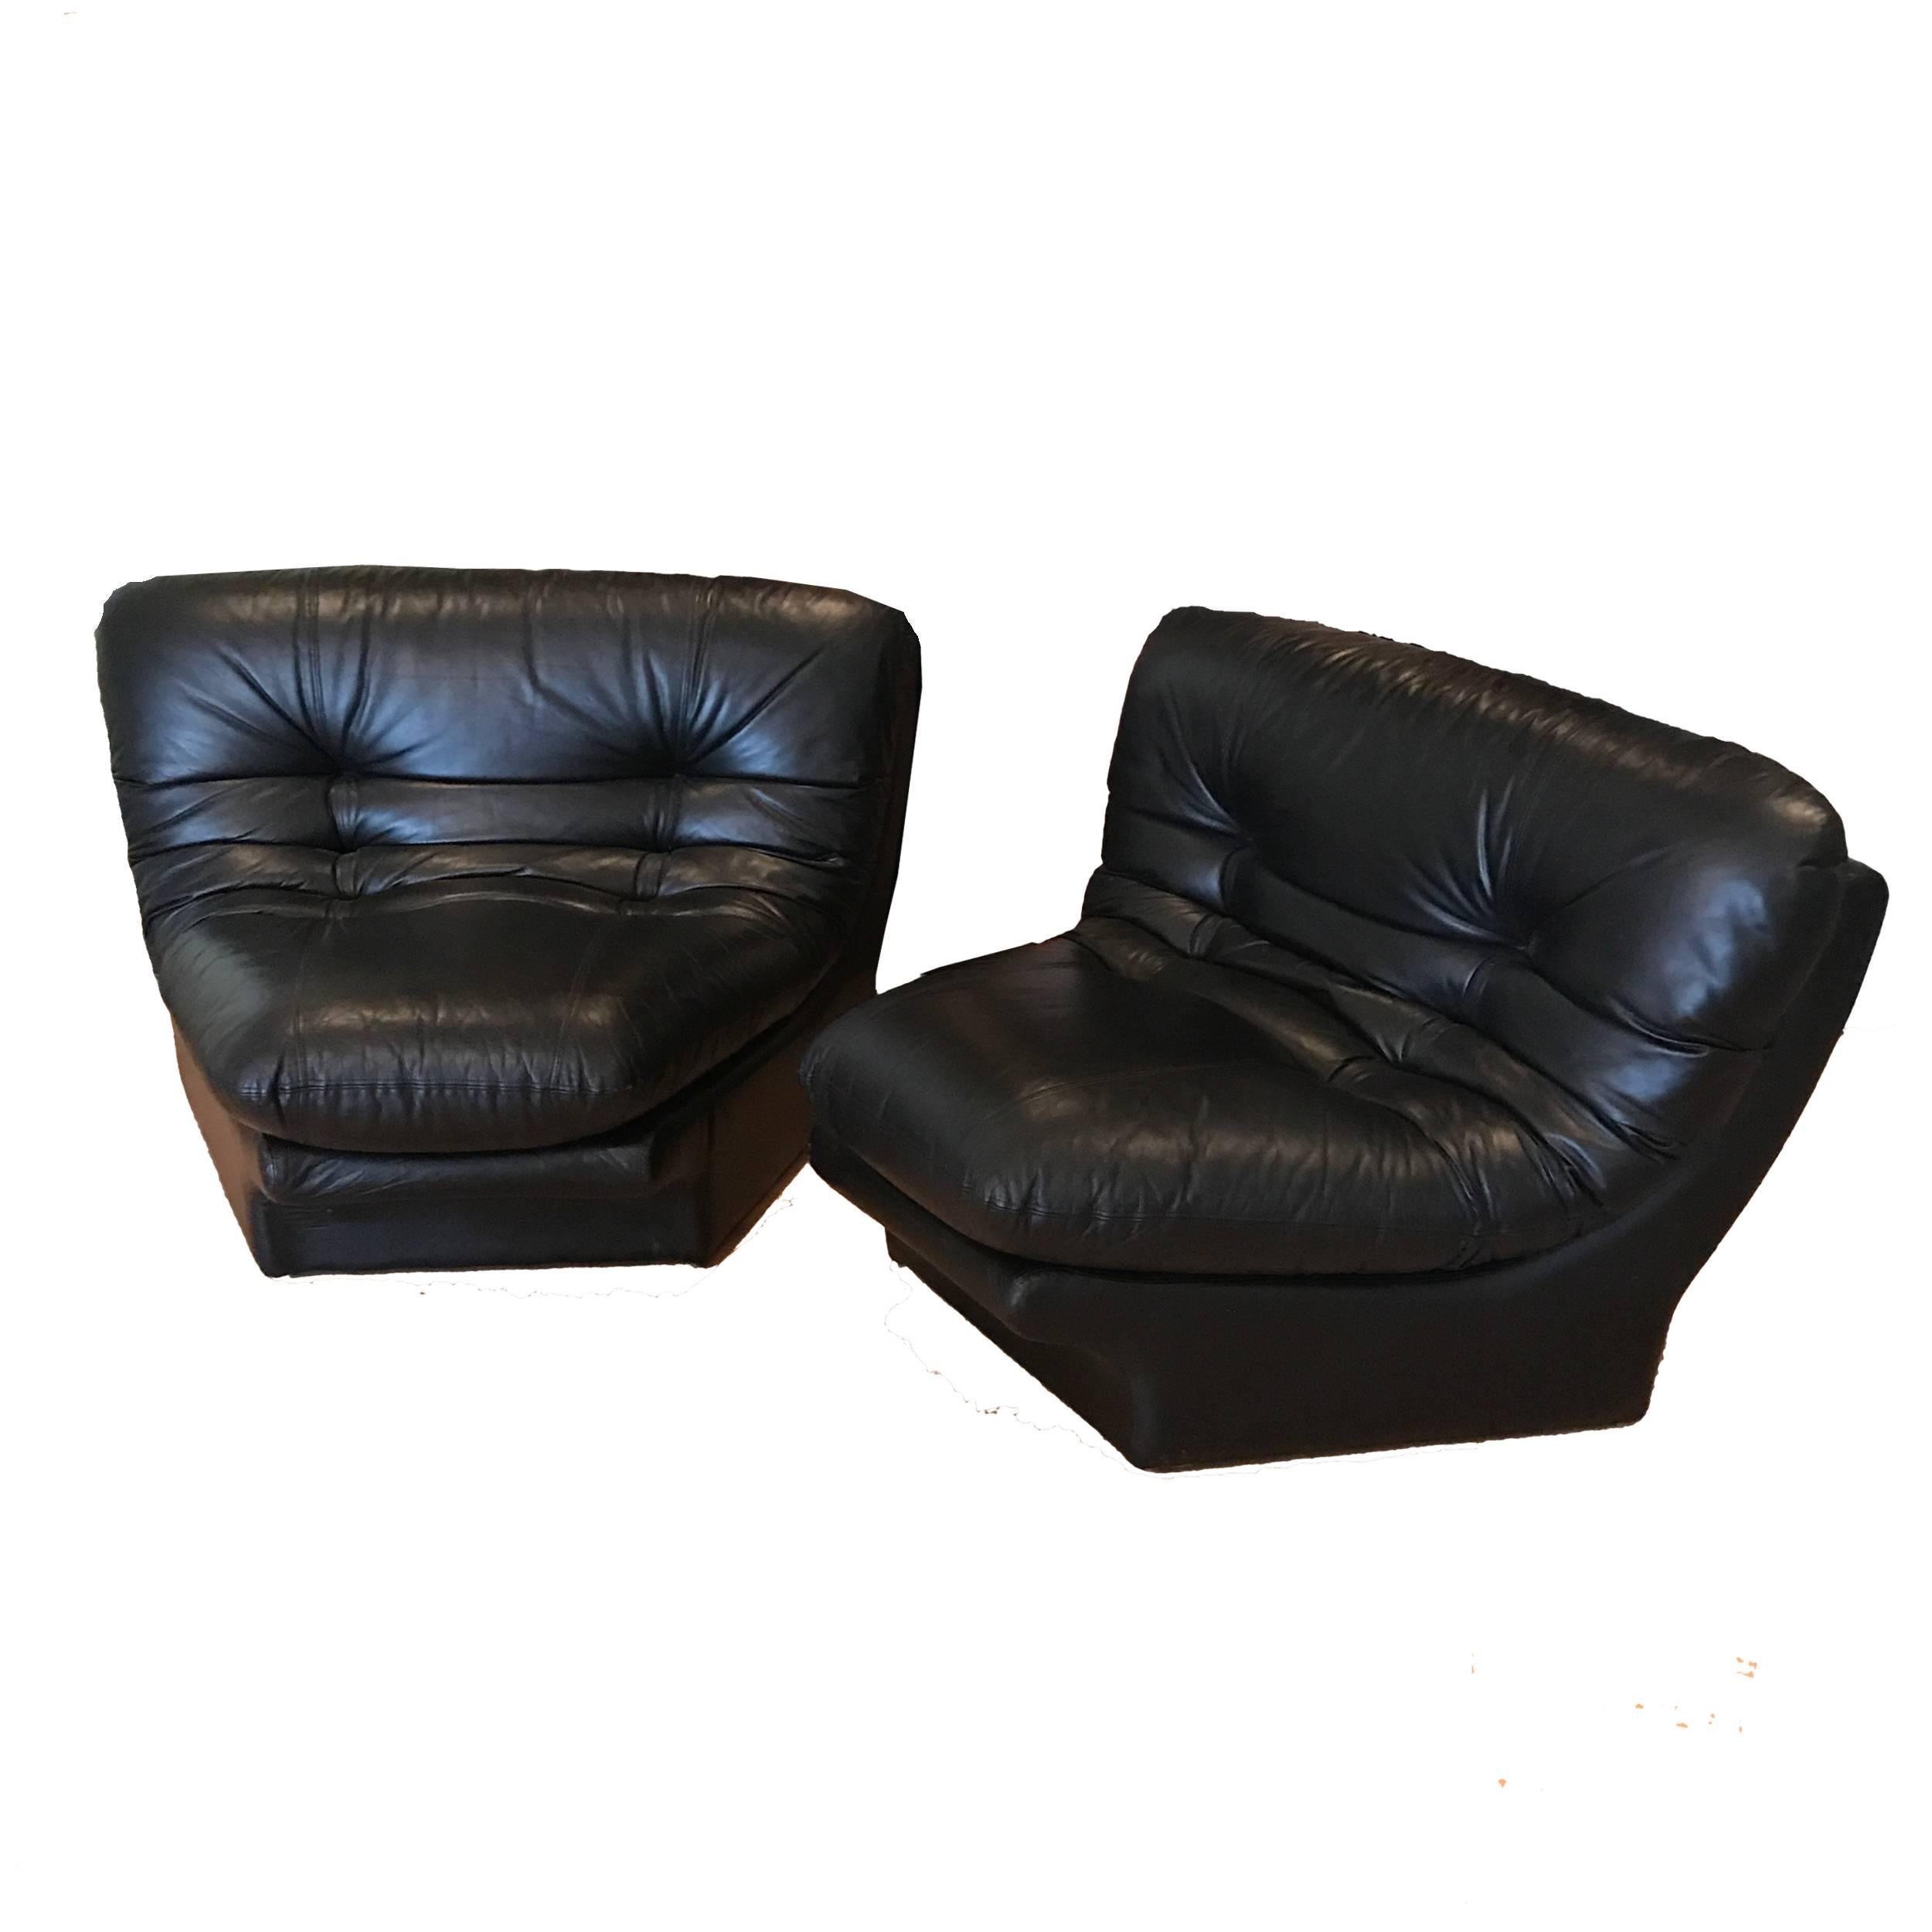 Late 20th Century Pair Stunning 1970s Space Age Modern Black Wedge Leather Lounge Chairs  Preview